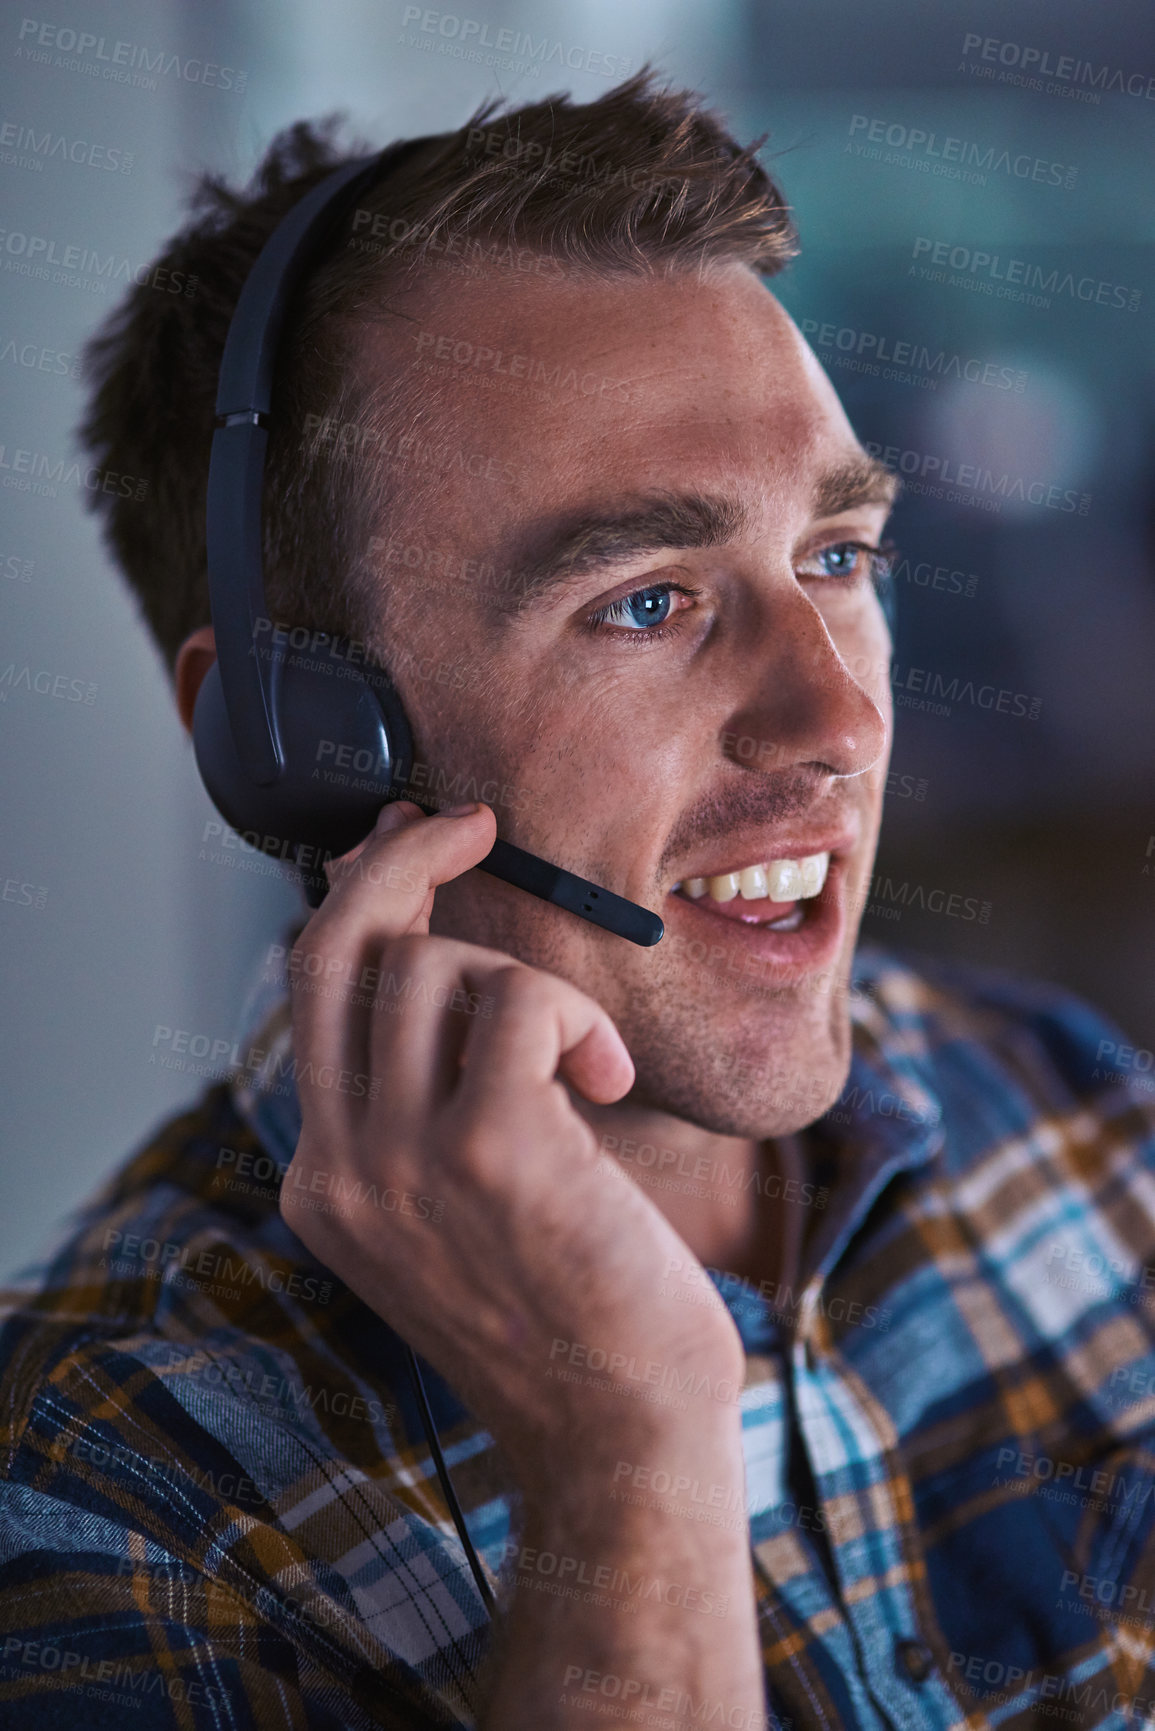 Buy stock photo Shot of a happy customer service agent wearing a headset while sitting in the office